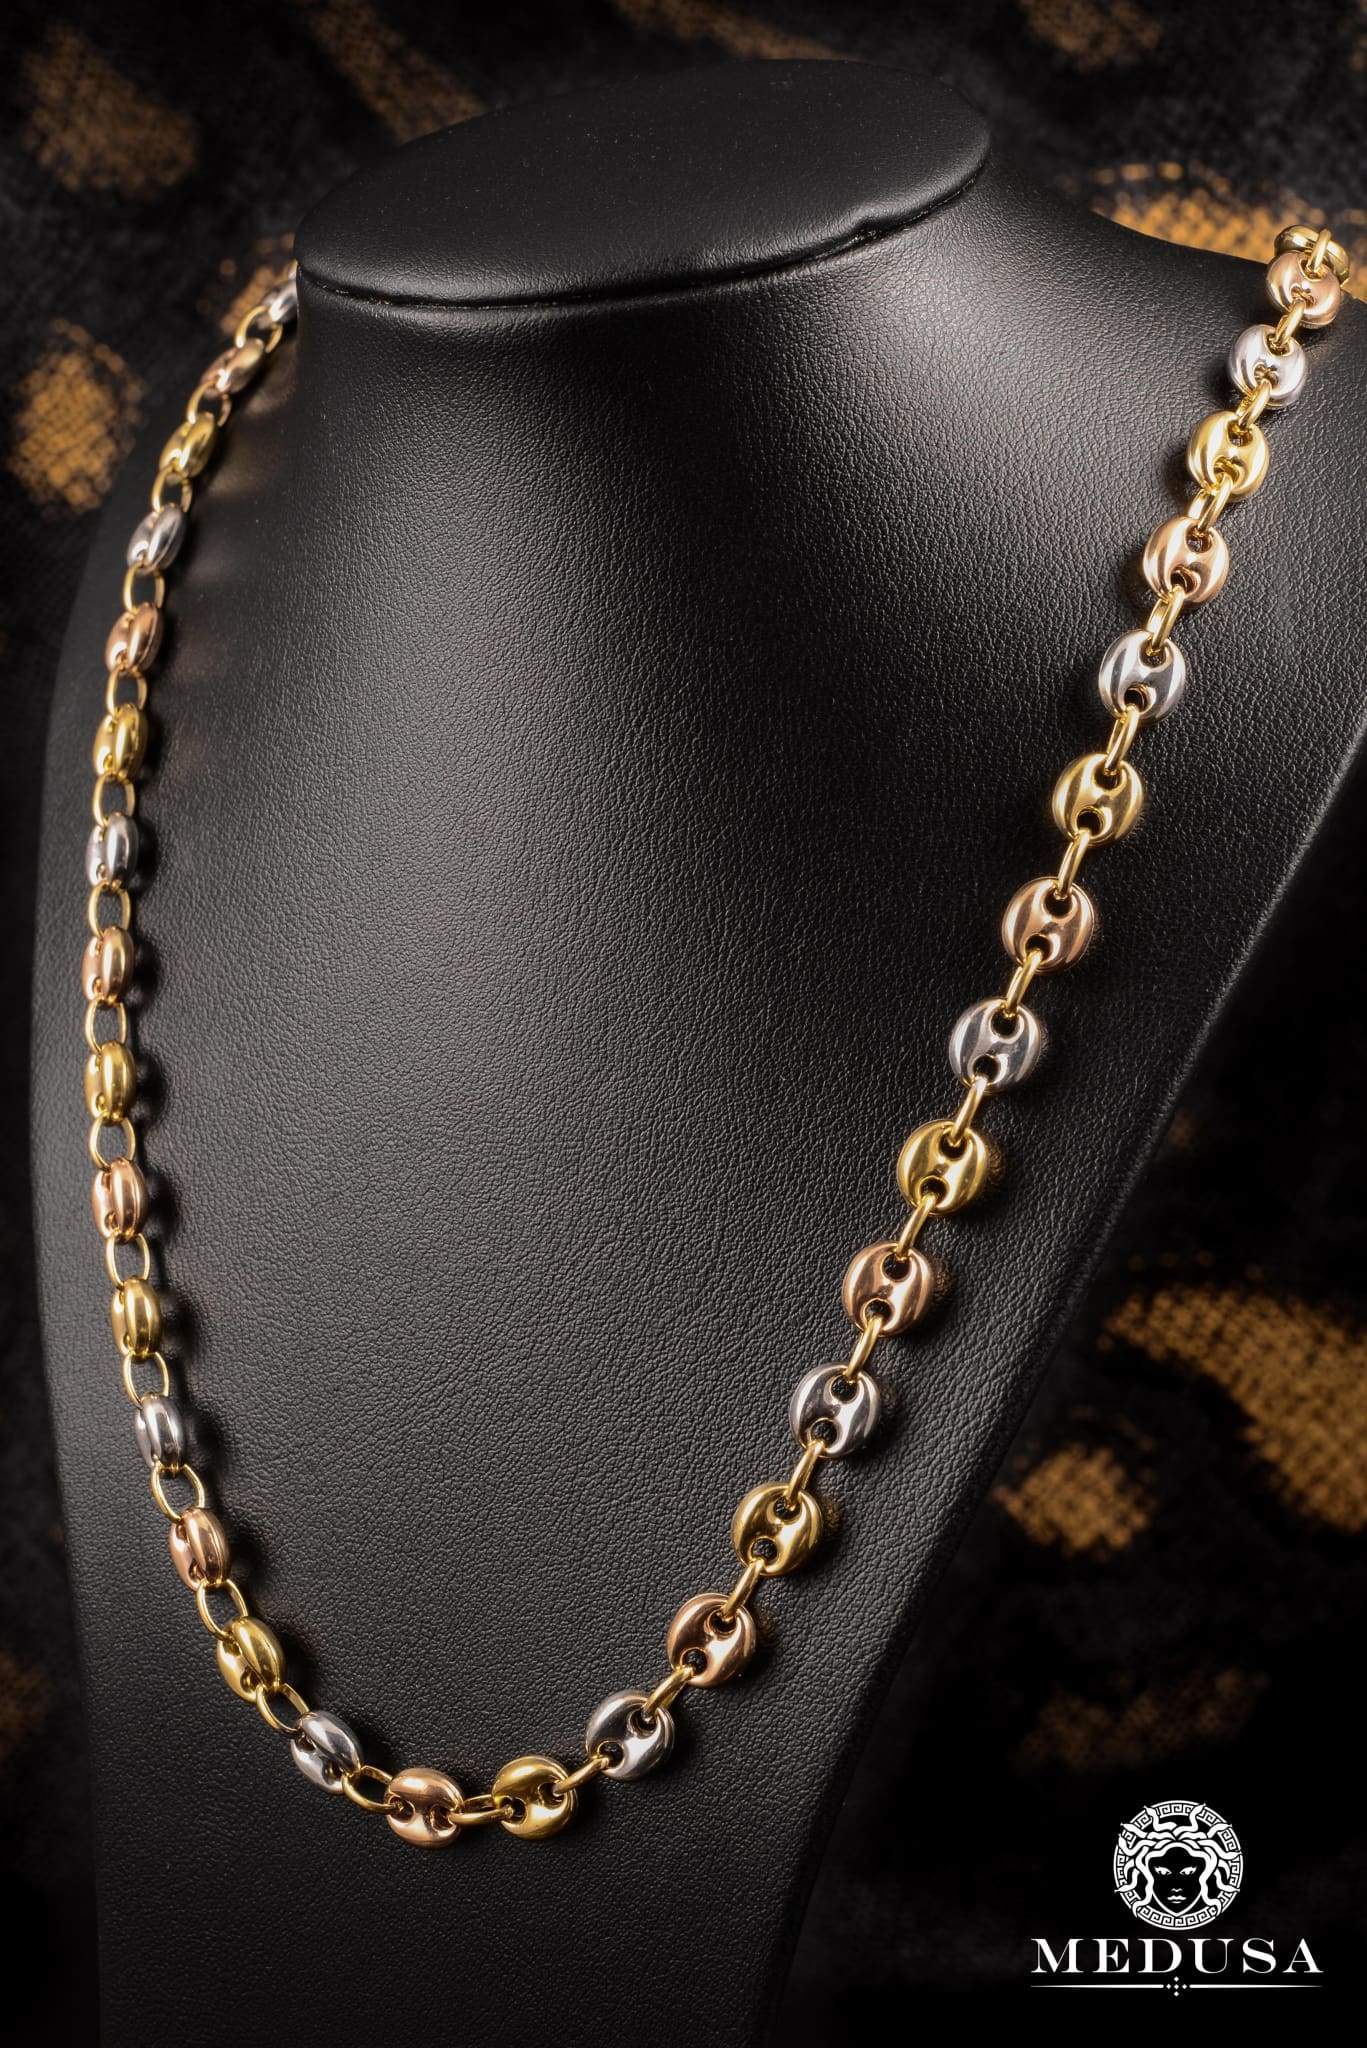 gold puffed gucci link chain